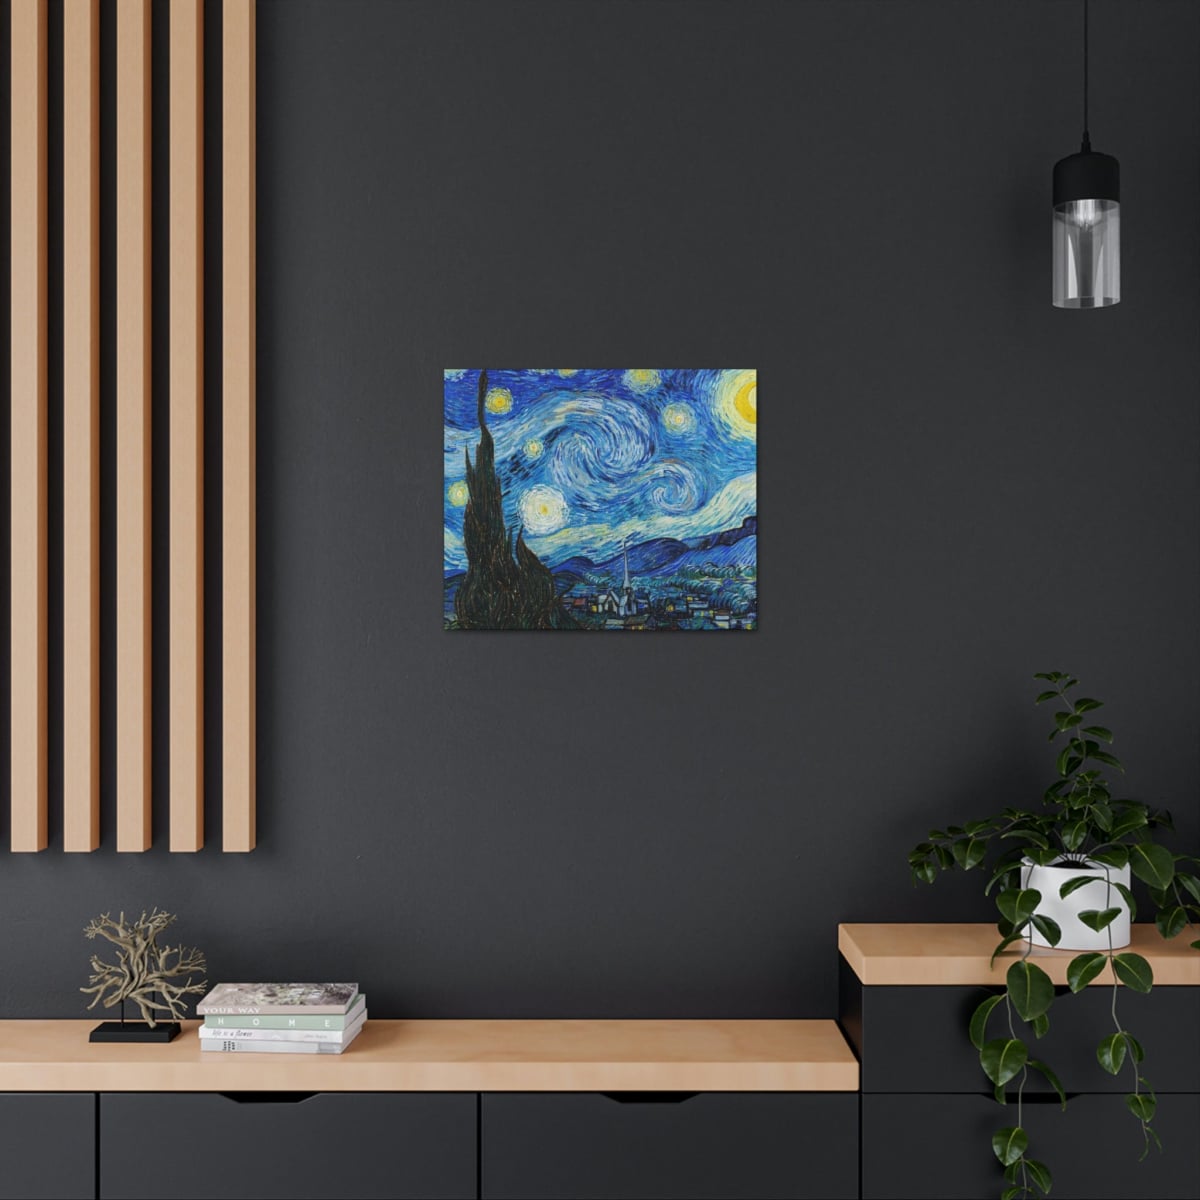 The Starry Night Van Gogh Canvas Gallery Wraps - Famous Art